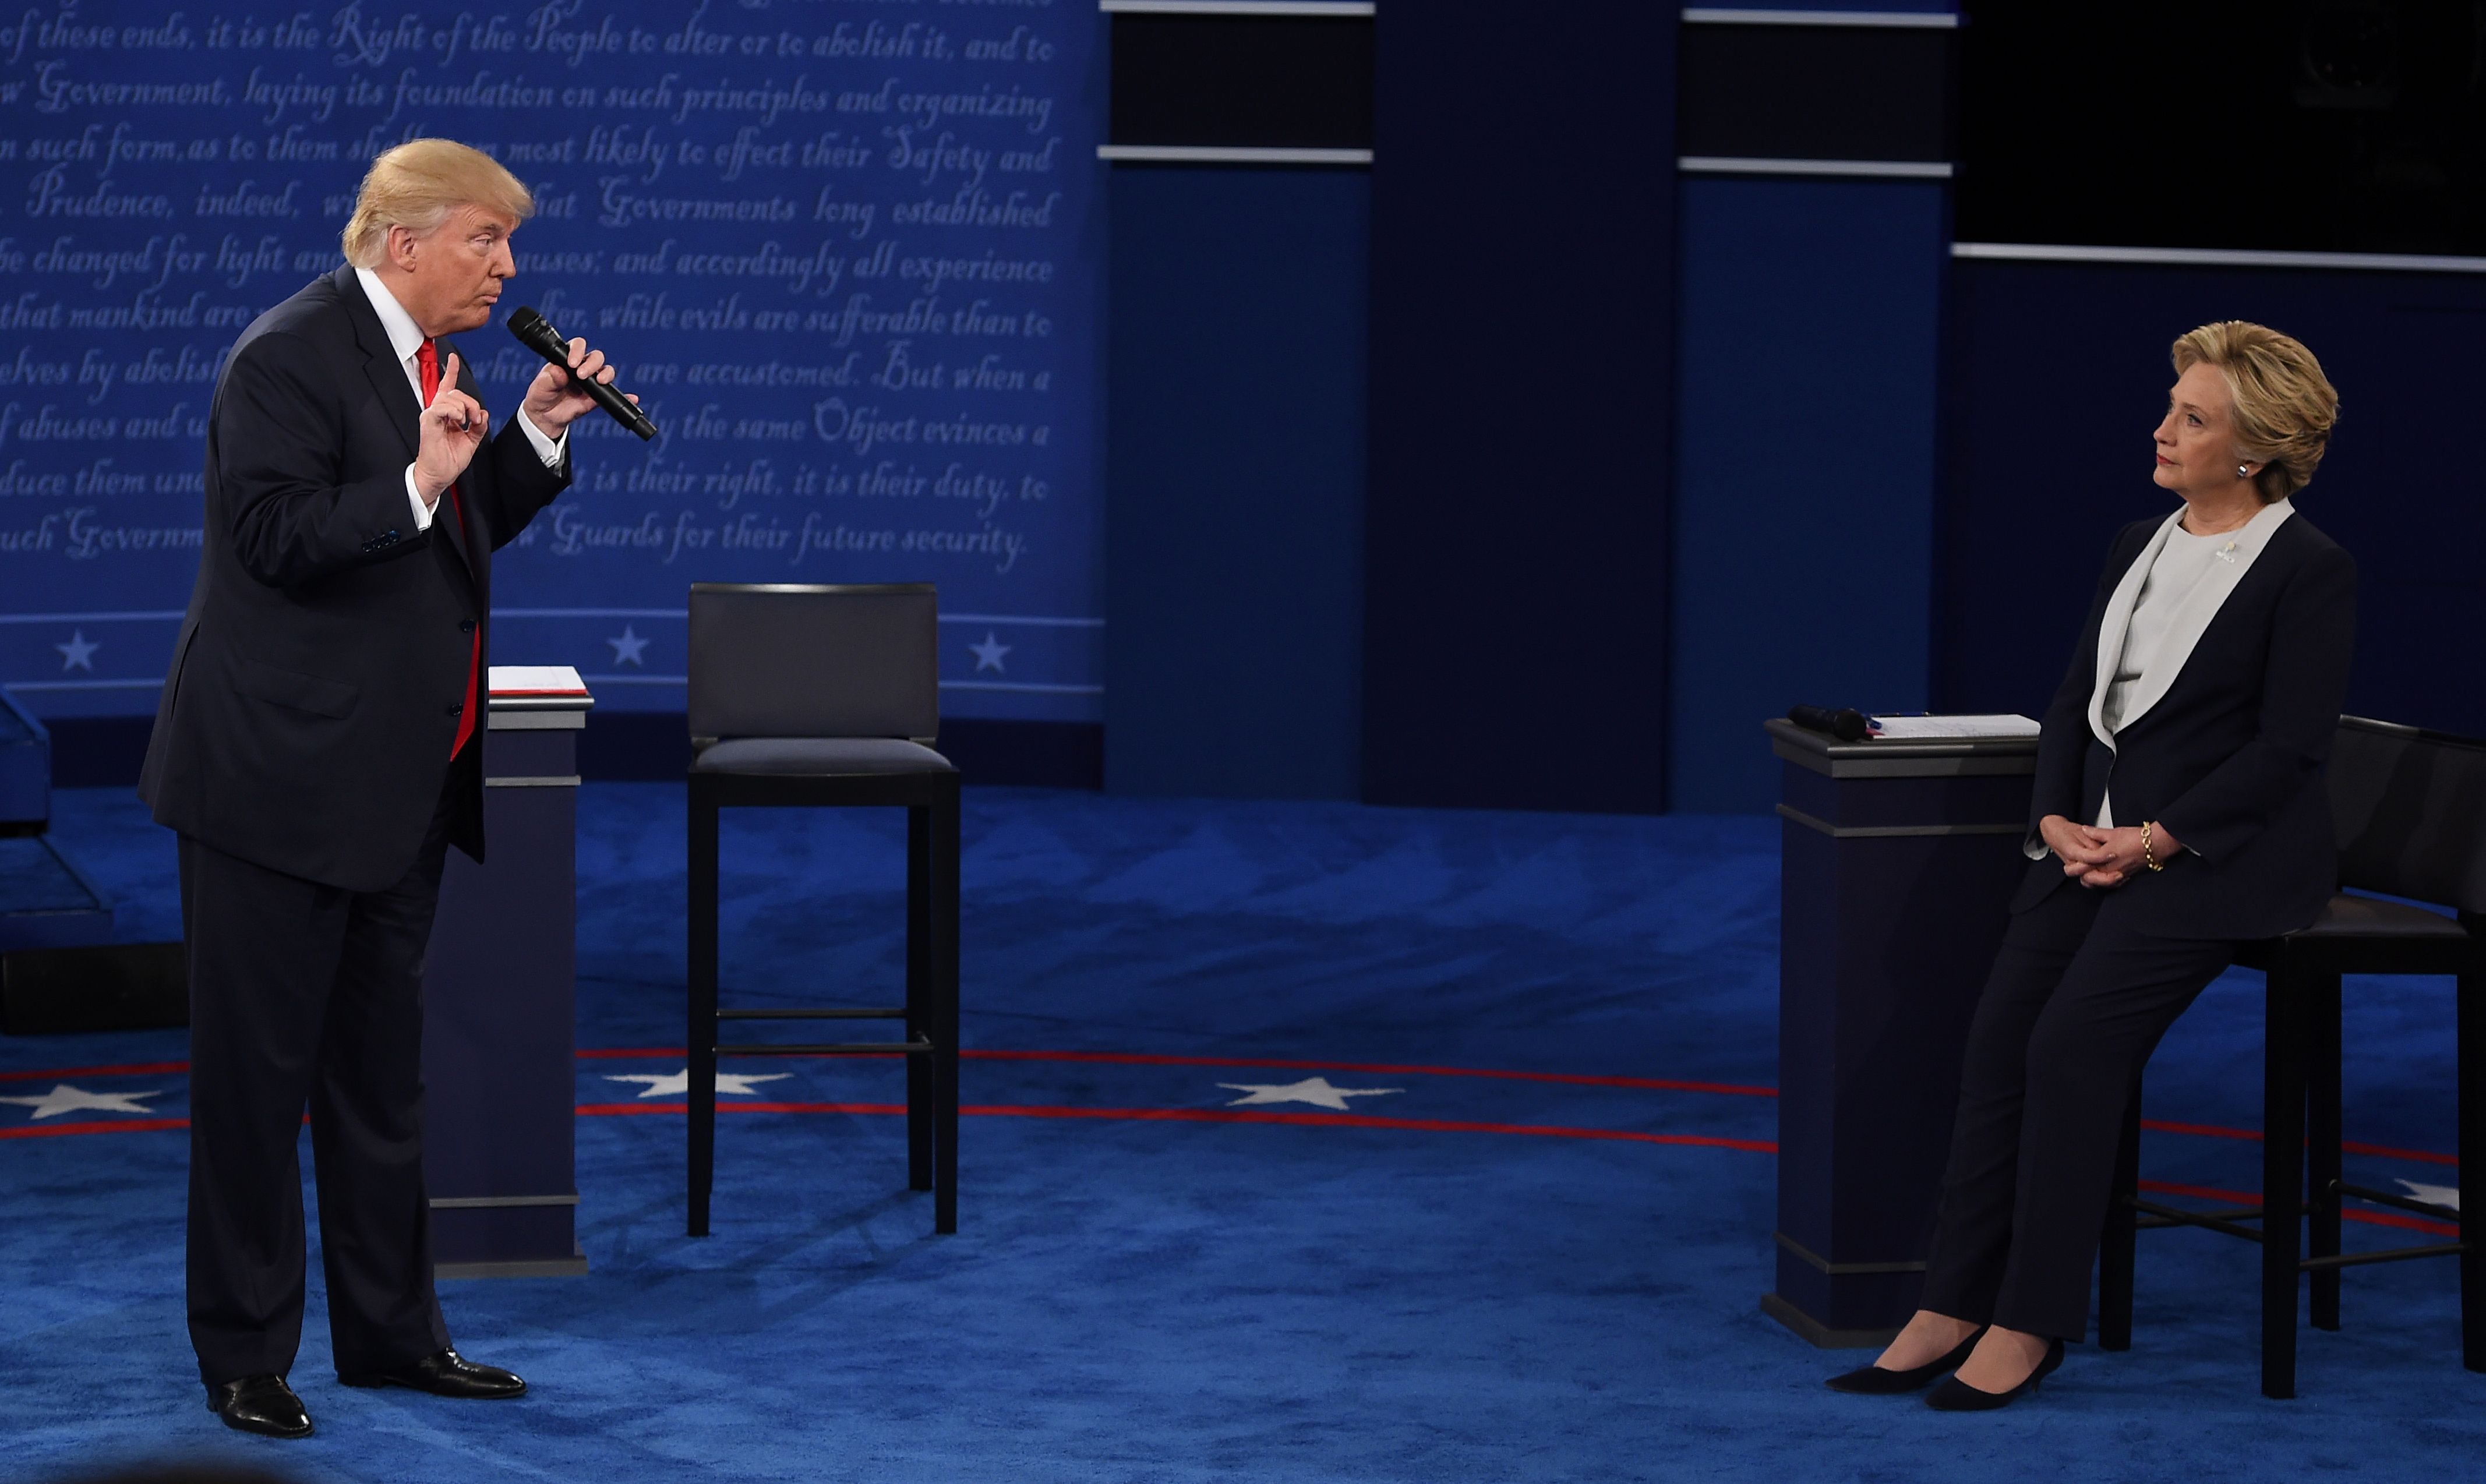 Democratic presidential candidate Hillary Clinton and Republican presidential candidate Donald Trump debate during the second presidential debate at Washington University in St. Louis on Oct. 9, 2016.